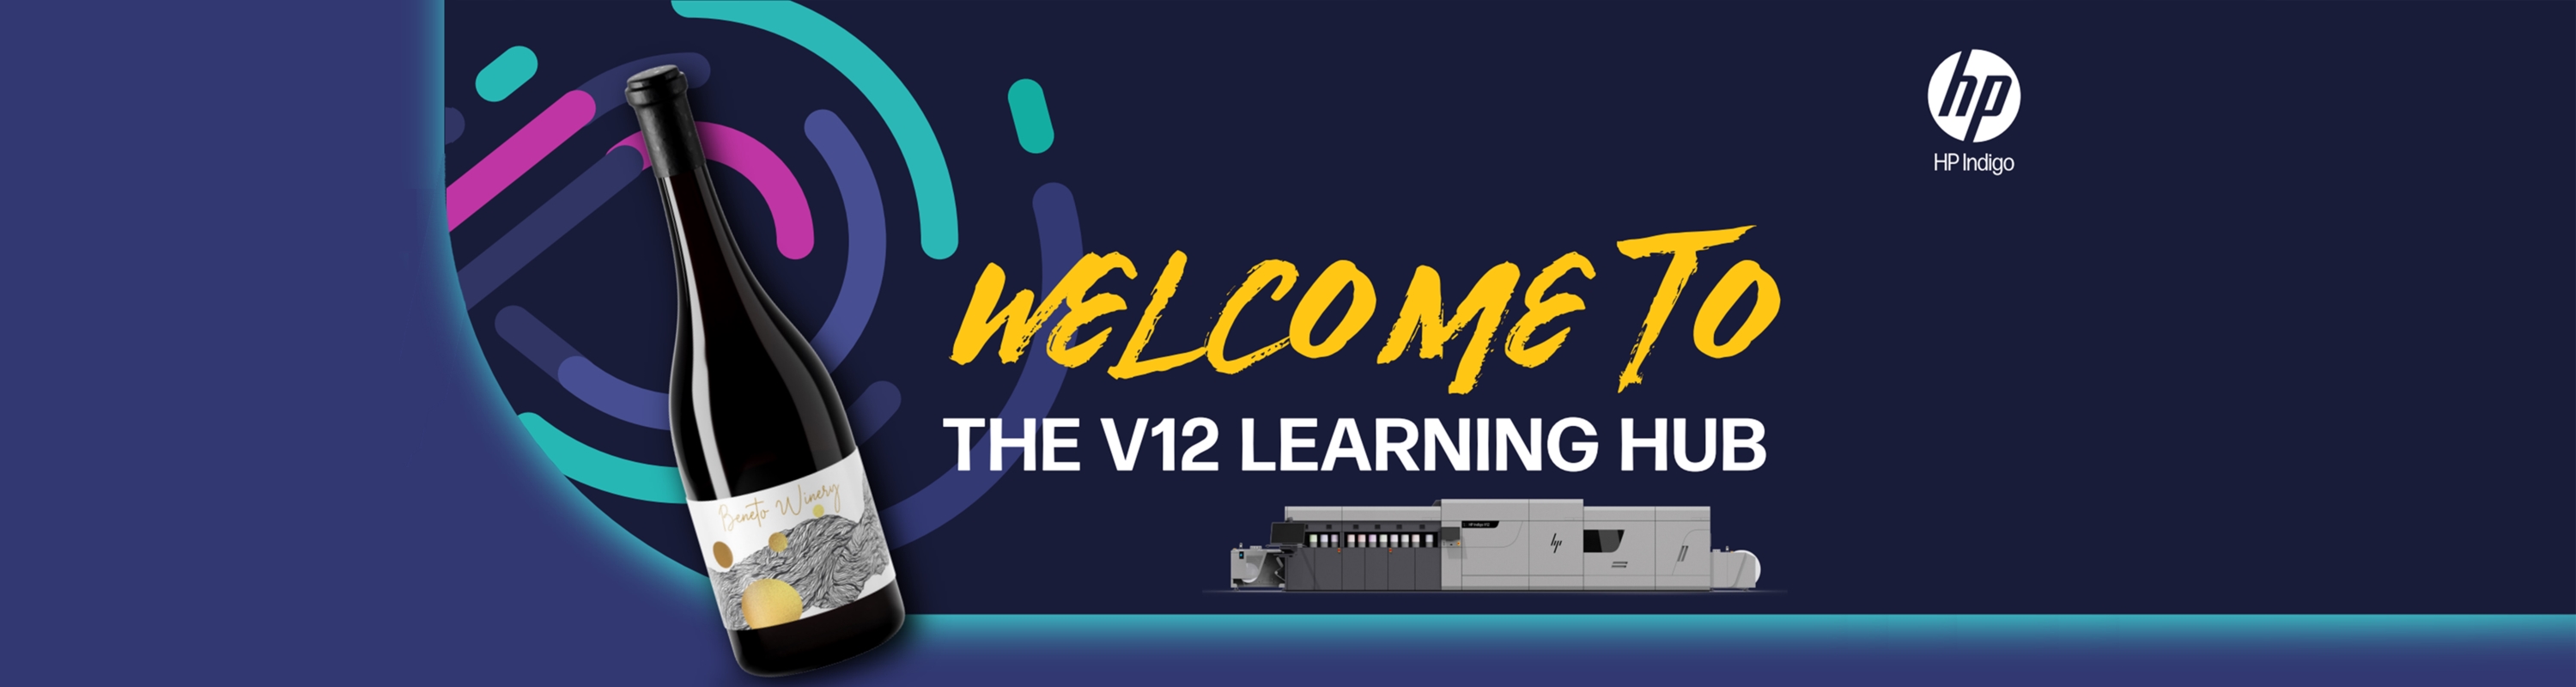 Welcome to the V12 learning hub - Webinar | January 22  | 11:30 AM or 12:00 PM EST